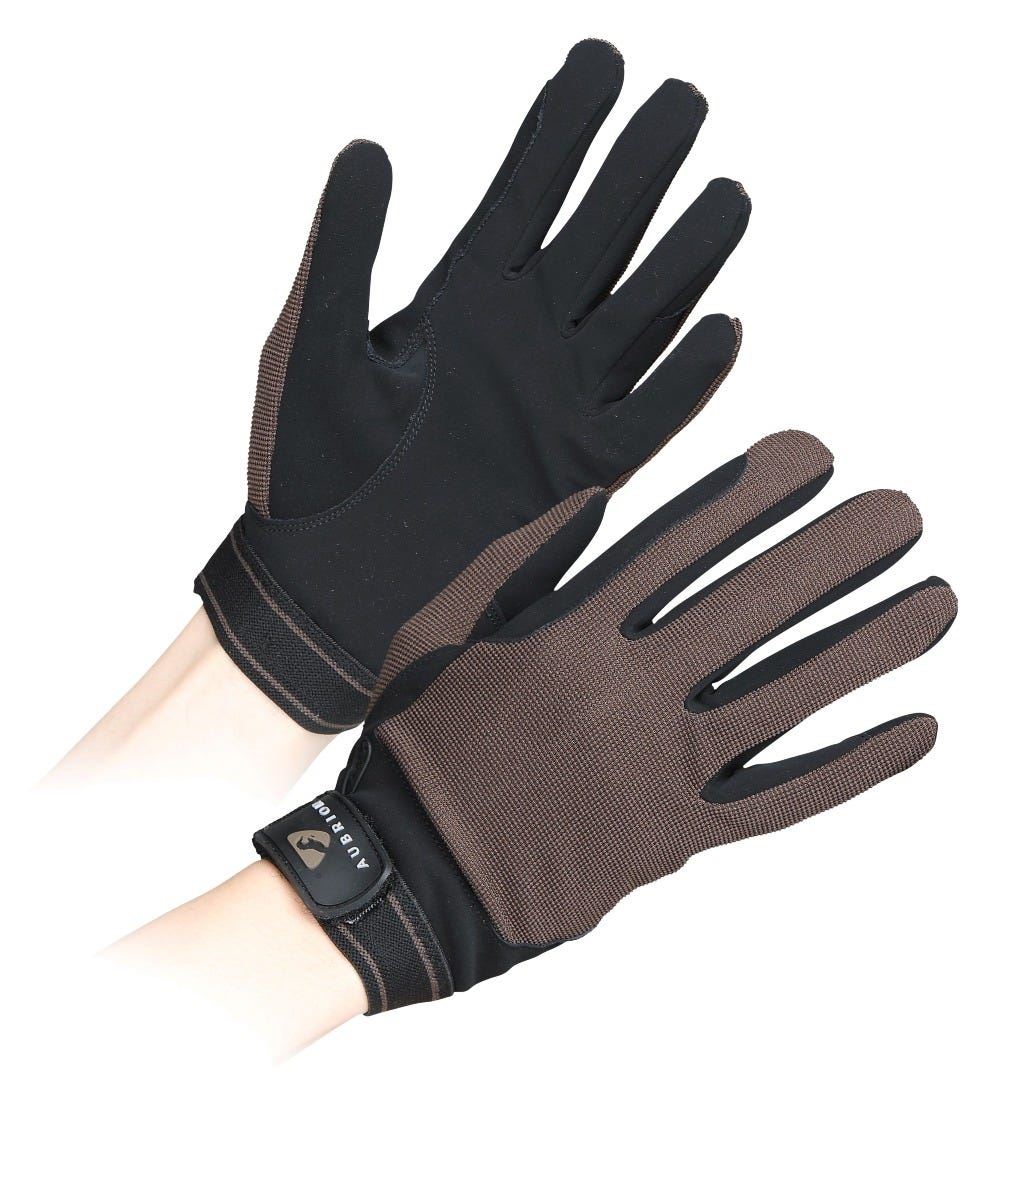 Shires Aubrion Mesh Riding Gloves - Just Horse Riders